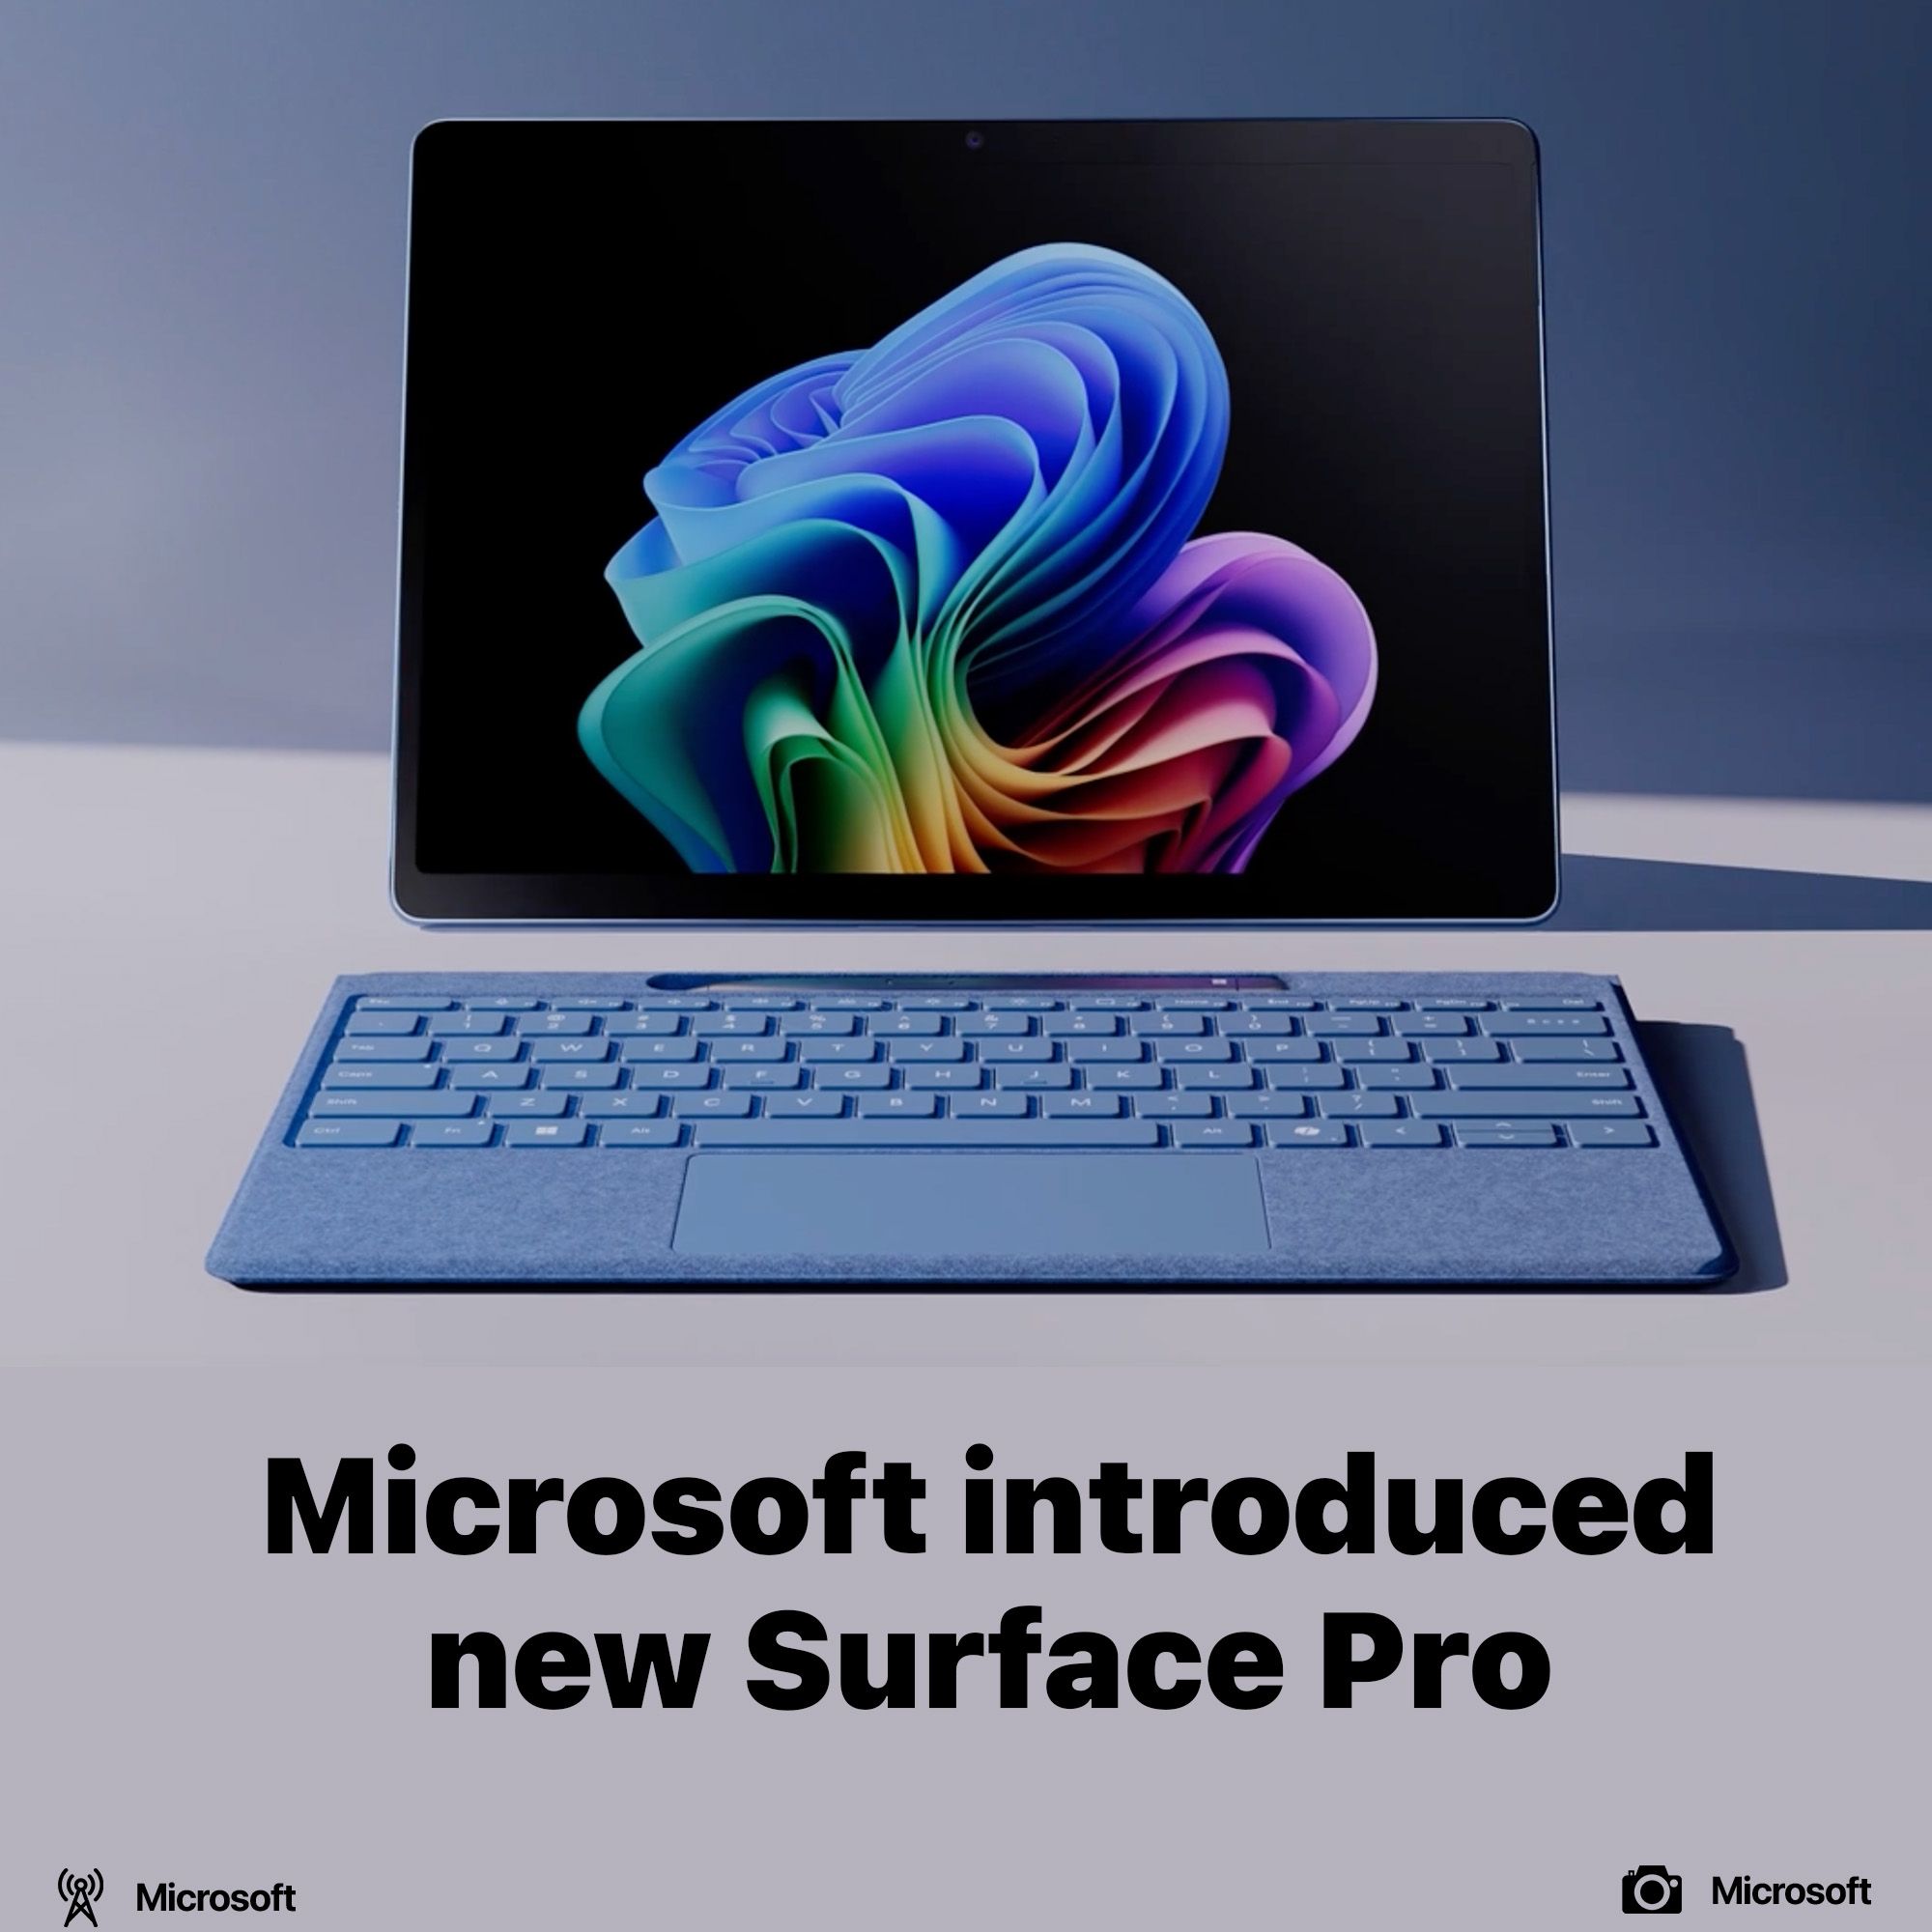 Microsoft introduced new Surface Pro